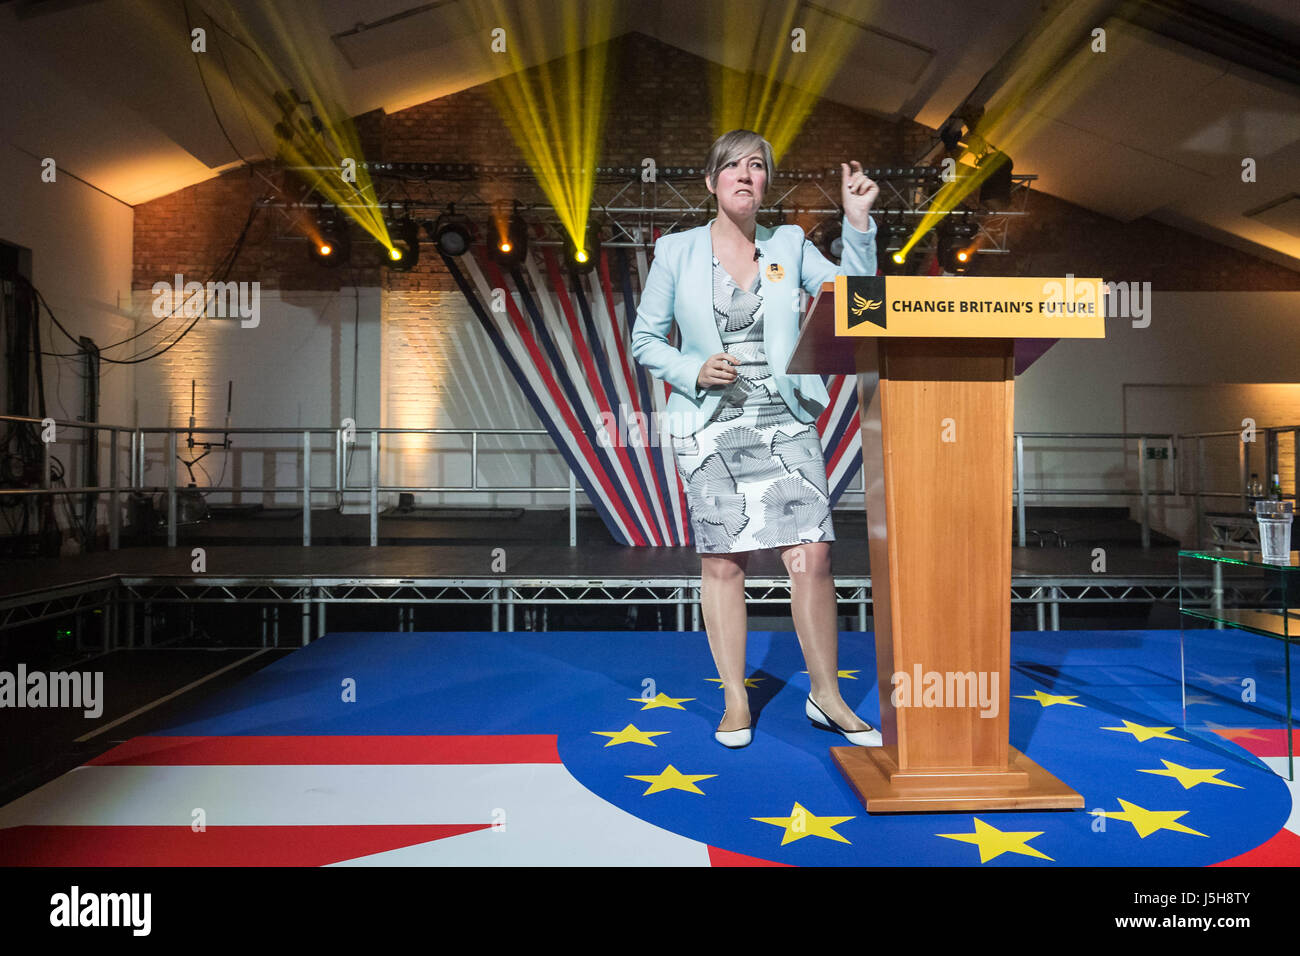 London, UK. 17th May, 2017. Daisy Cooper, Liberal Democrat shadow minister for young people and candidate for St Albans, speaks just prior to the Lib Dem general election manifesto launch © Guy Corbishley/Alamy Live News Stock Photo